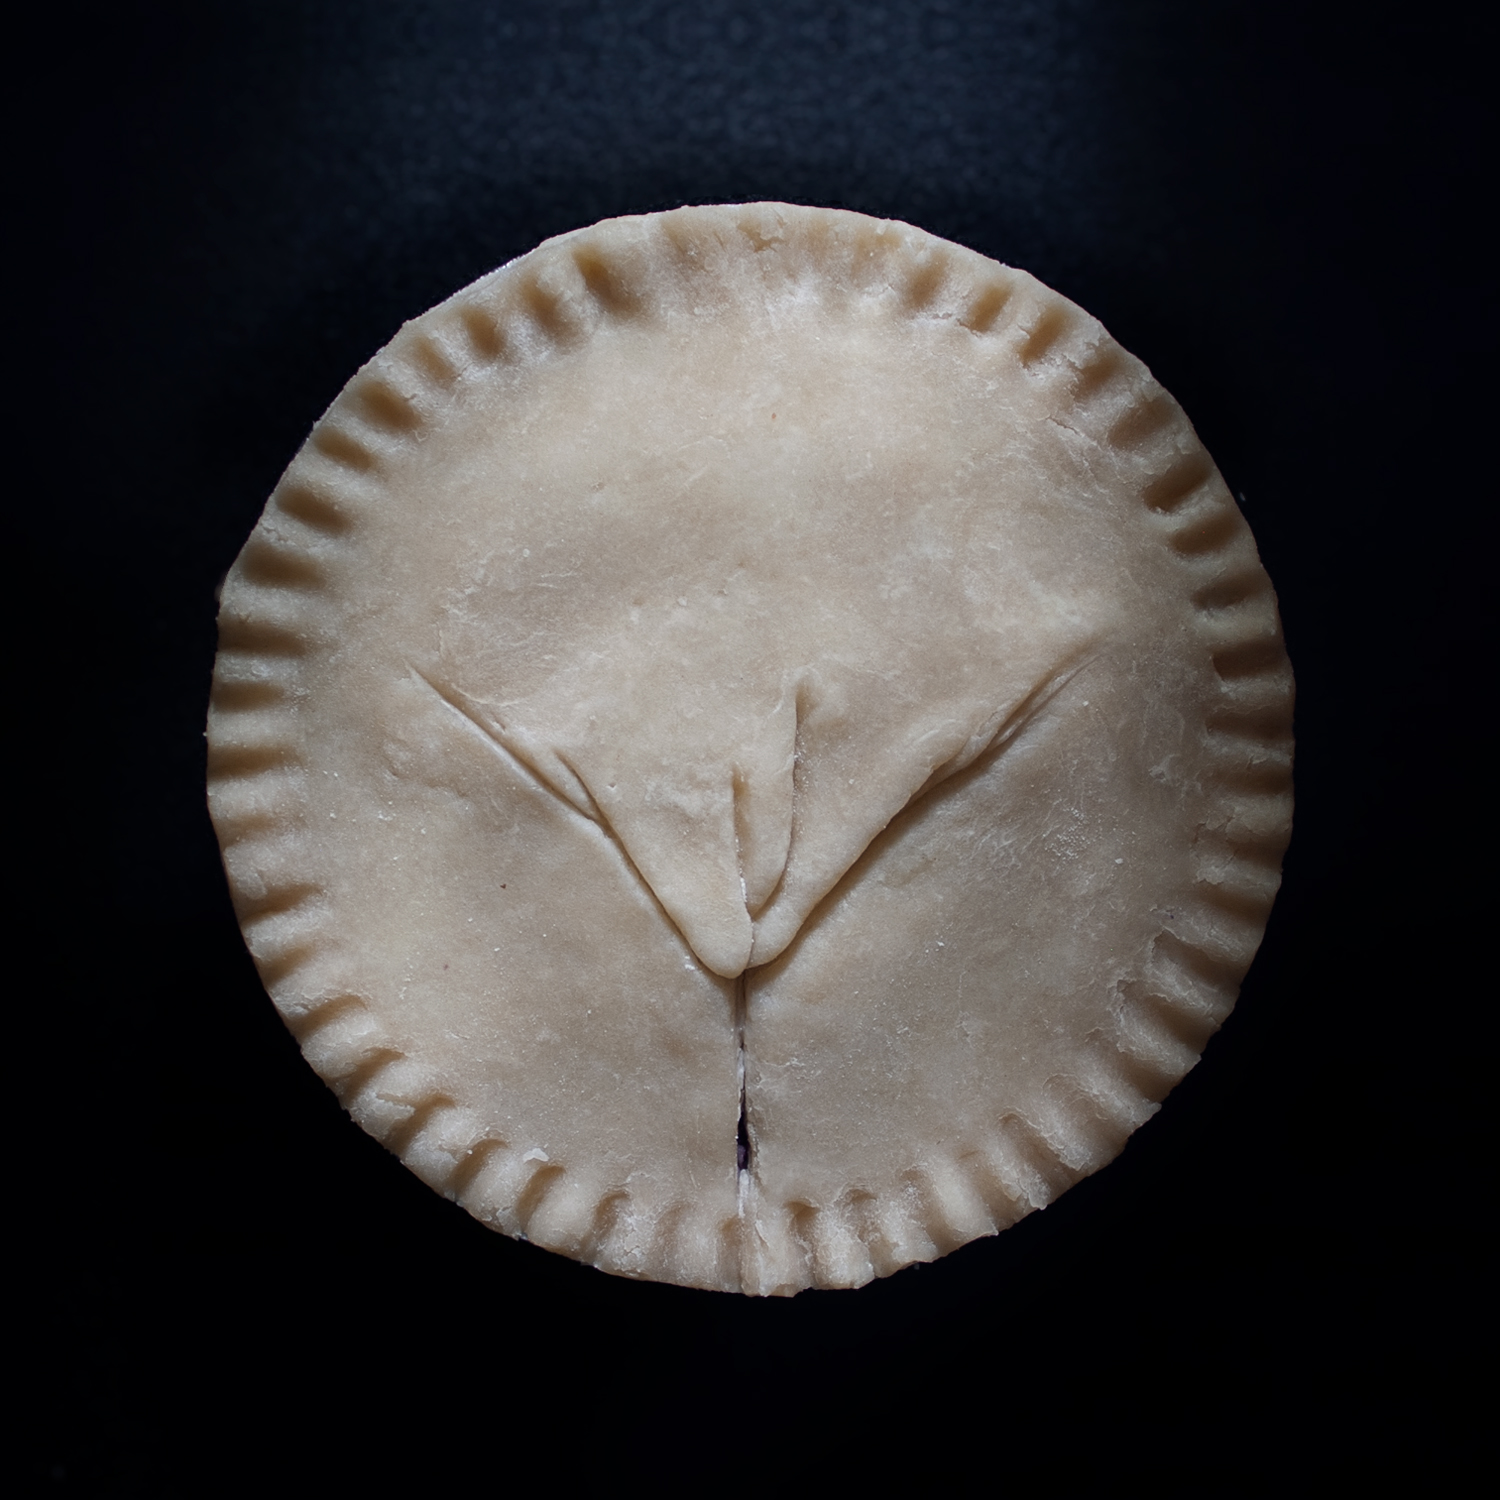 Pie 22, a pie sculpted to appear like a vulva